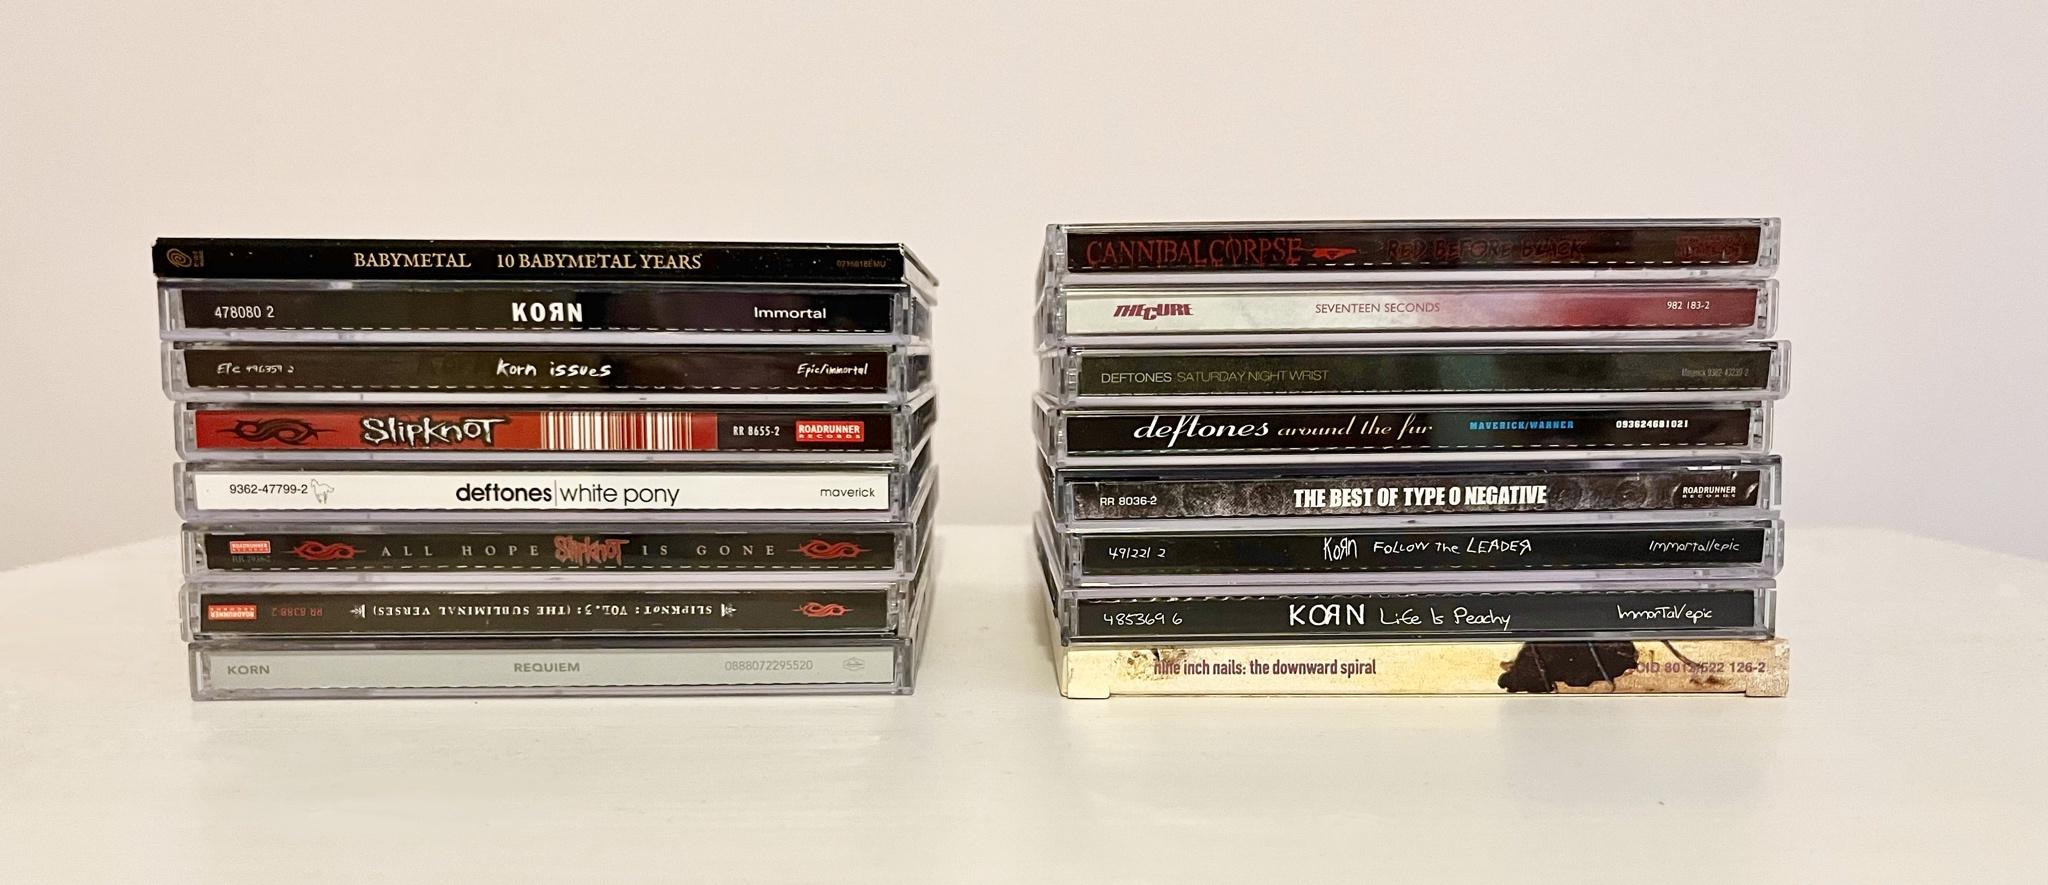 cds from different bands and artists such as; babymetal, korn, slipknot, deftones, cannibal corpse, the cure, type o negitive and nine inch nails